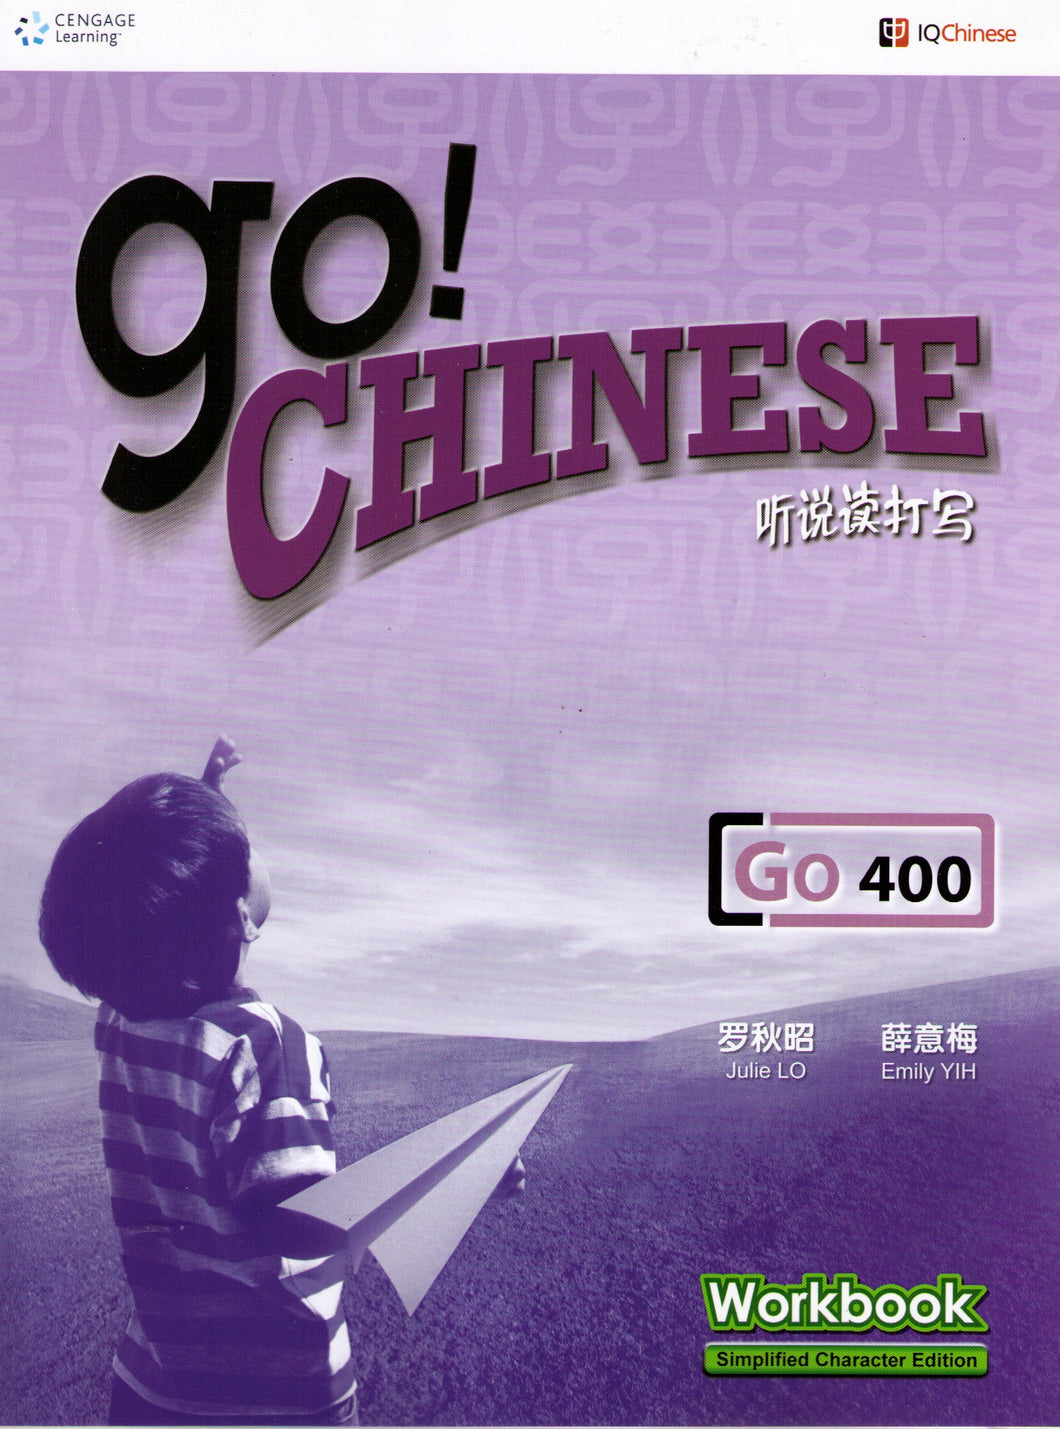 Go Chinese and IQ Chinese 400-Workbook-Simplified